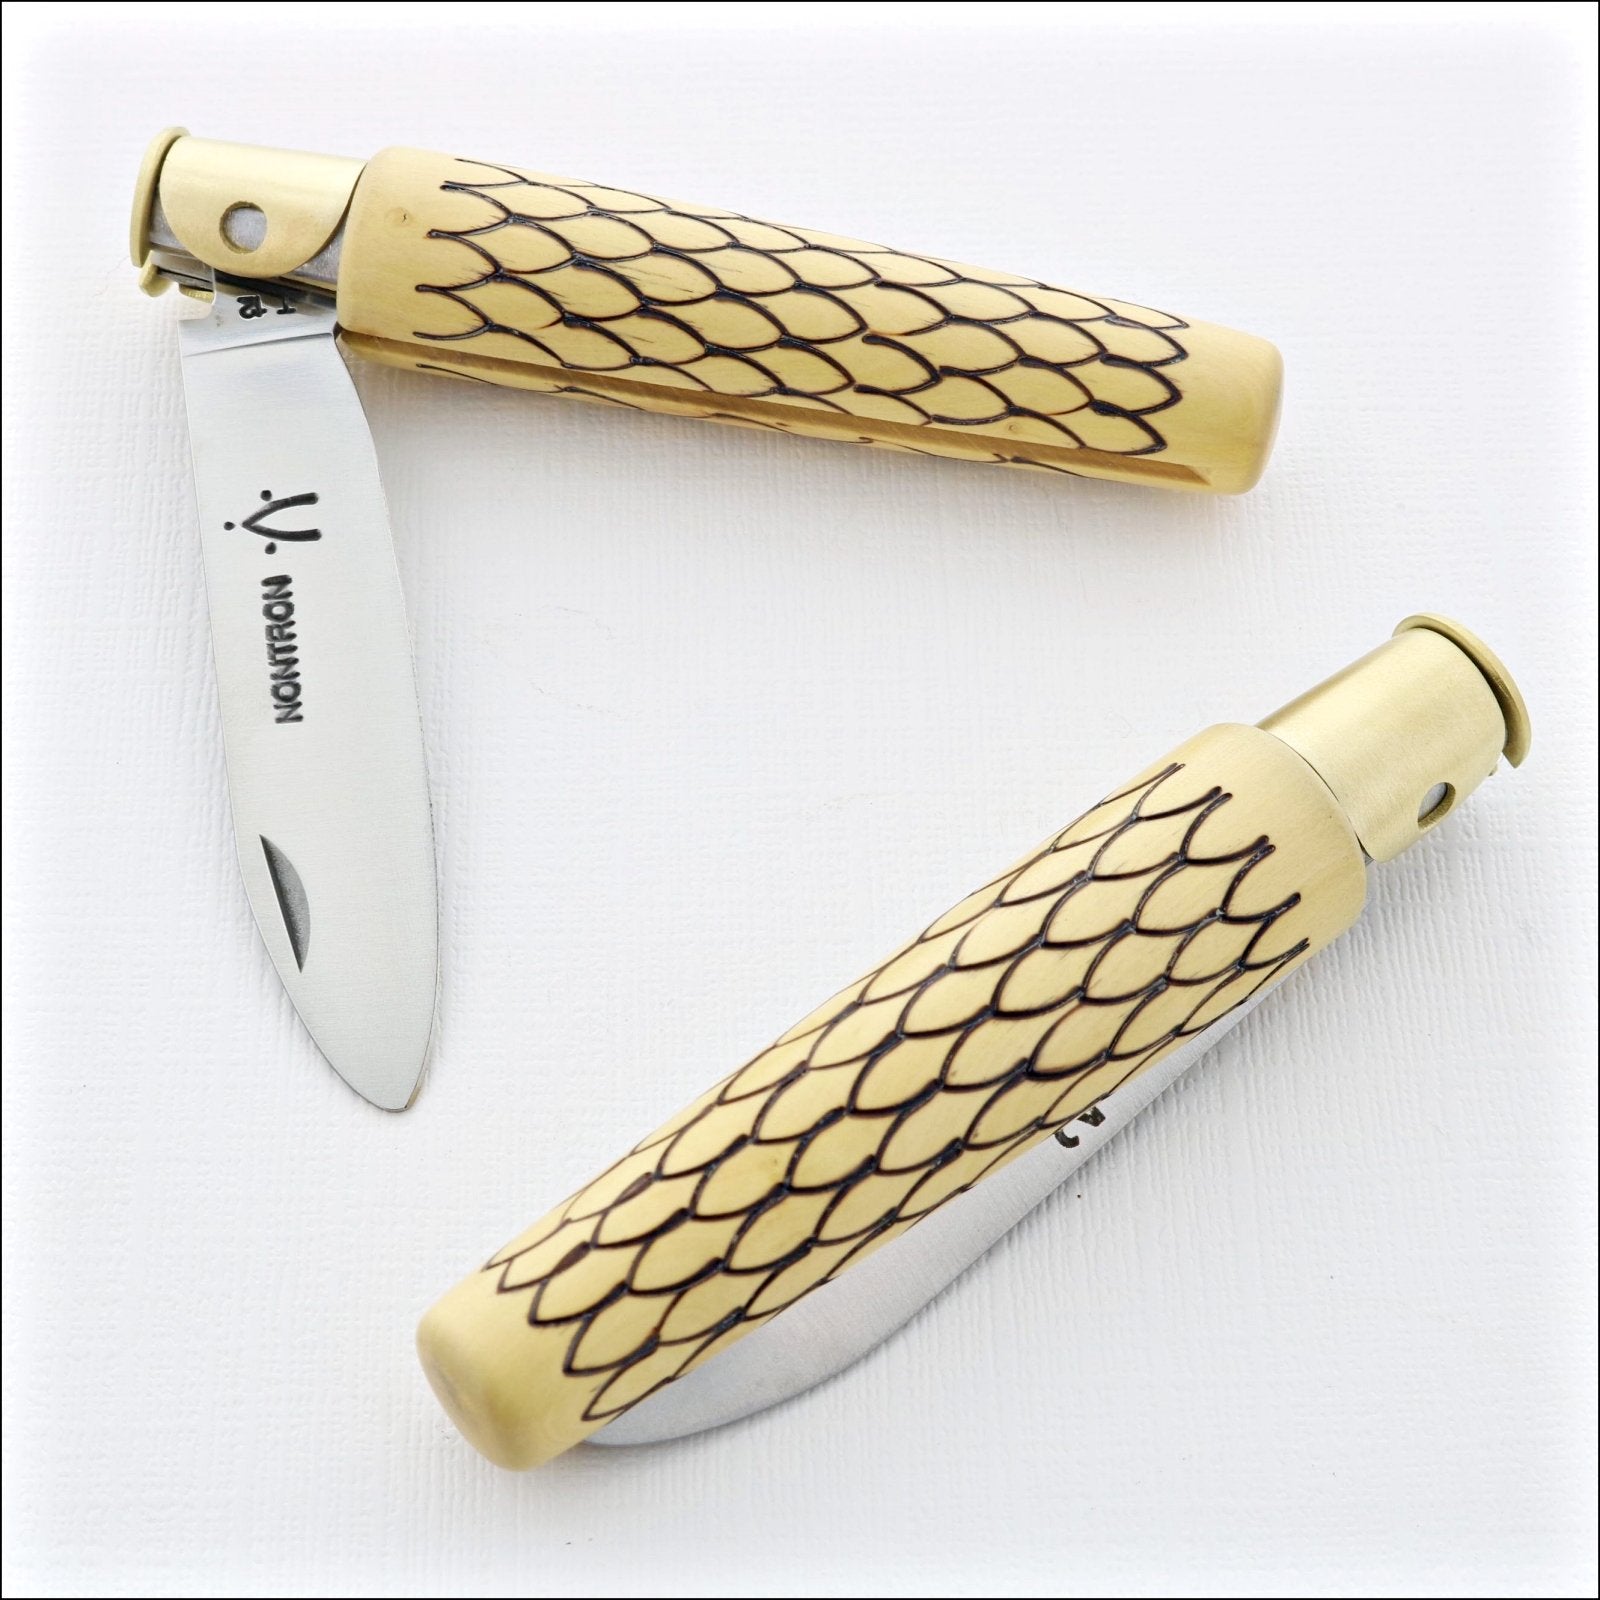 Nontron Pocket Knife No22 Feathers - Junior